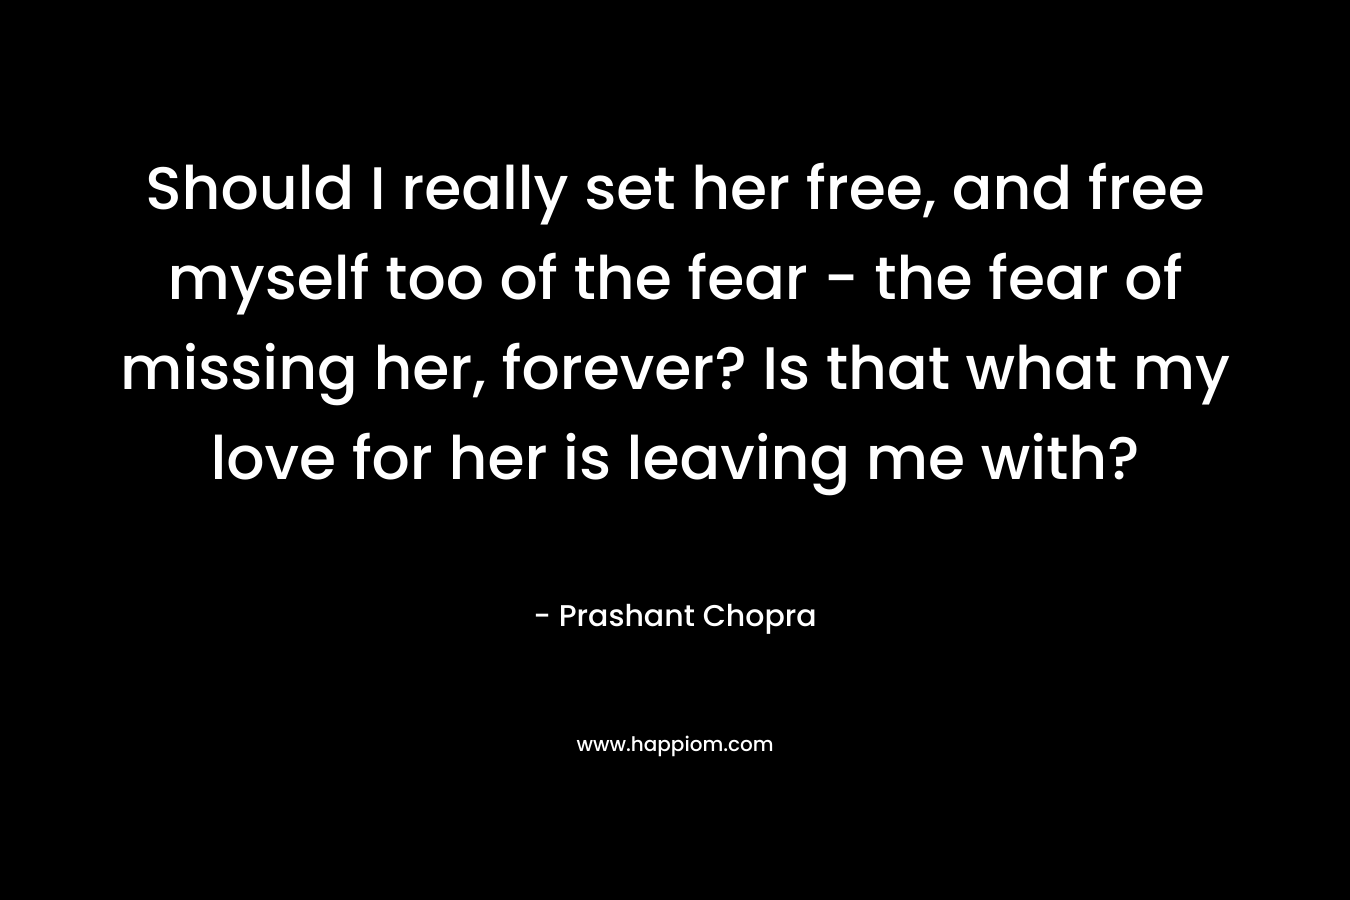 Should I really set her free, and free myself too of the fear – the fear of missing her, forever? Is that what my love for her is leaving me with? – Prashant Chopra